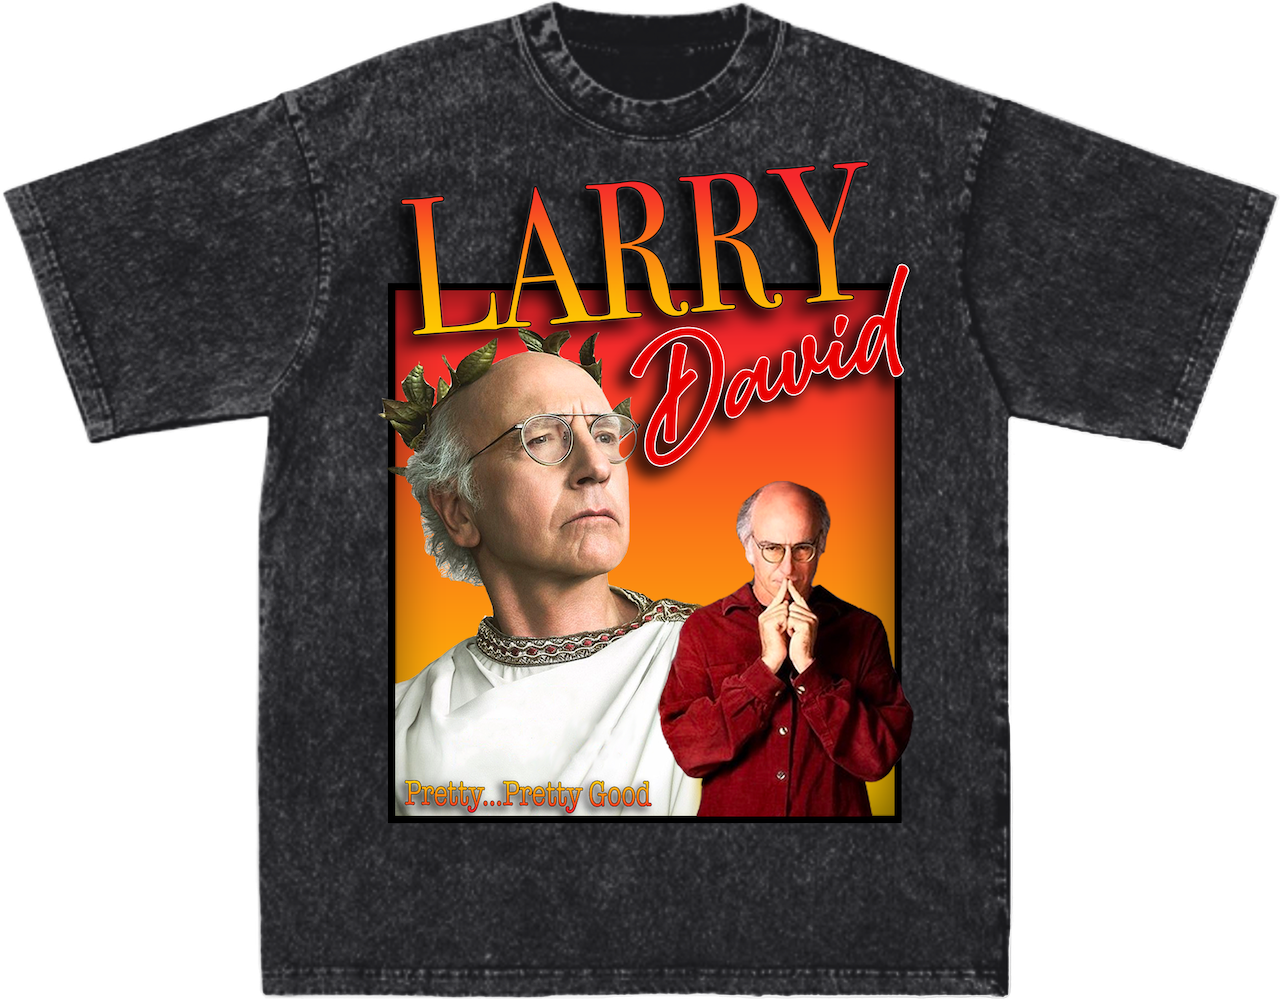 The Larry